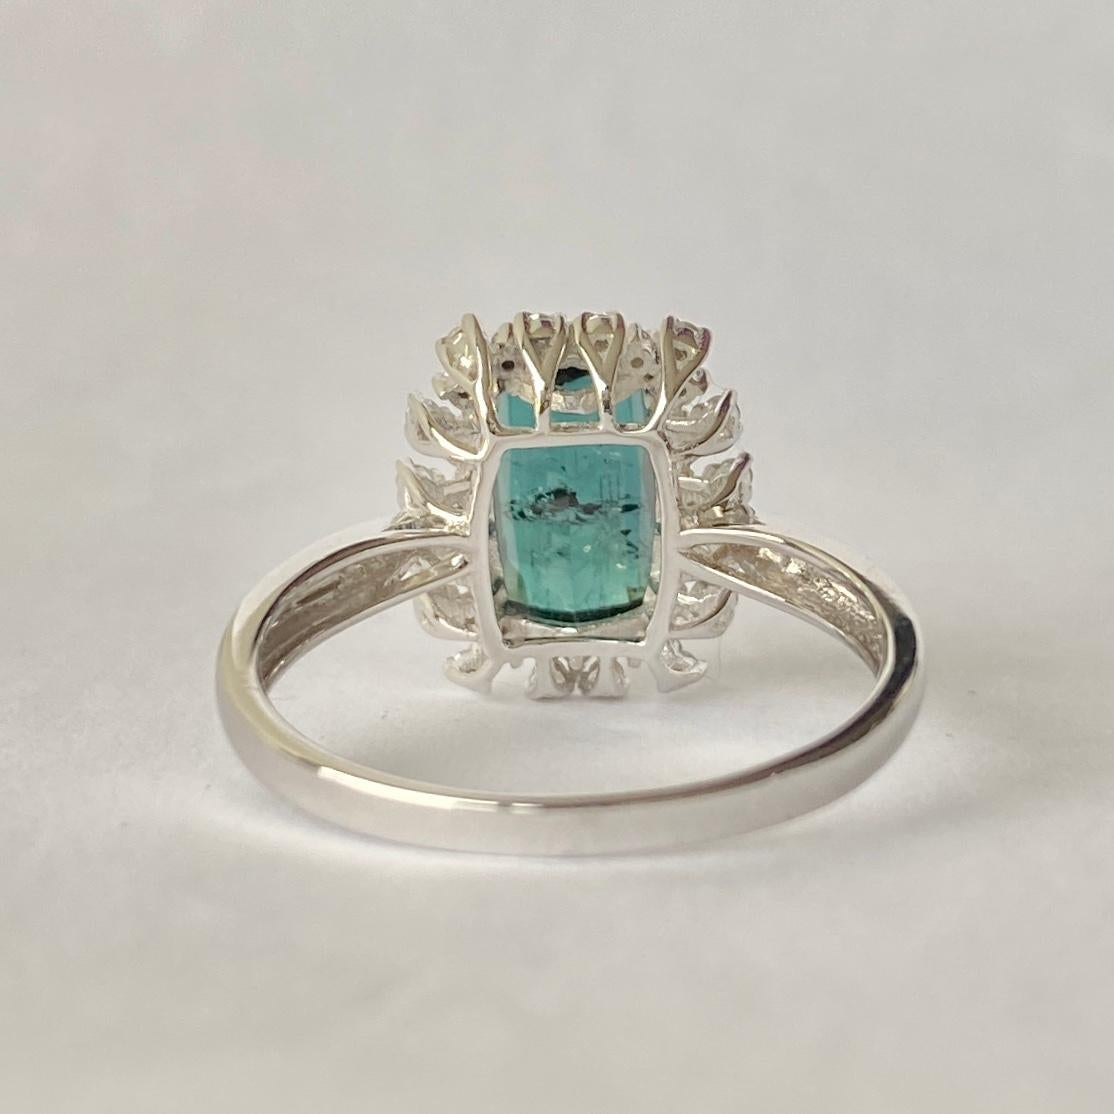 This gorgeous tourmaline is a deep inky blue/green colour and measures approx 2.5carat. This stone is surrounded by diamonds totalling 30pts. Modelled in 14carat white gold. 

Size: N 1/2 or 7 
Cluster Diameter: 13x11.5mm

Weight: 2.9g